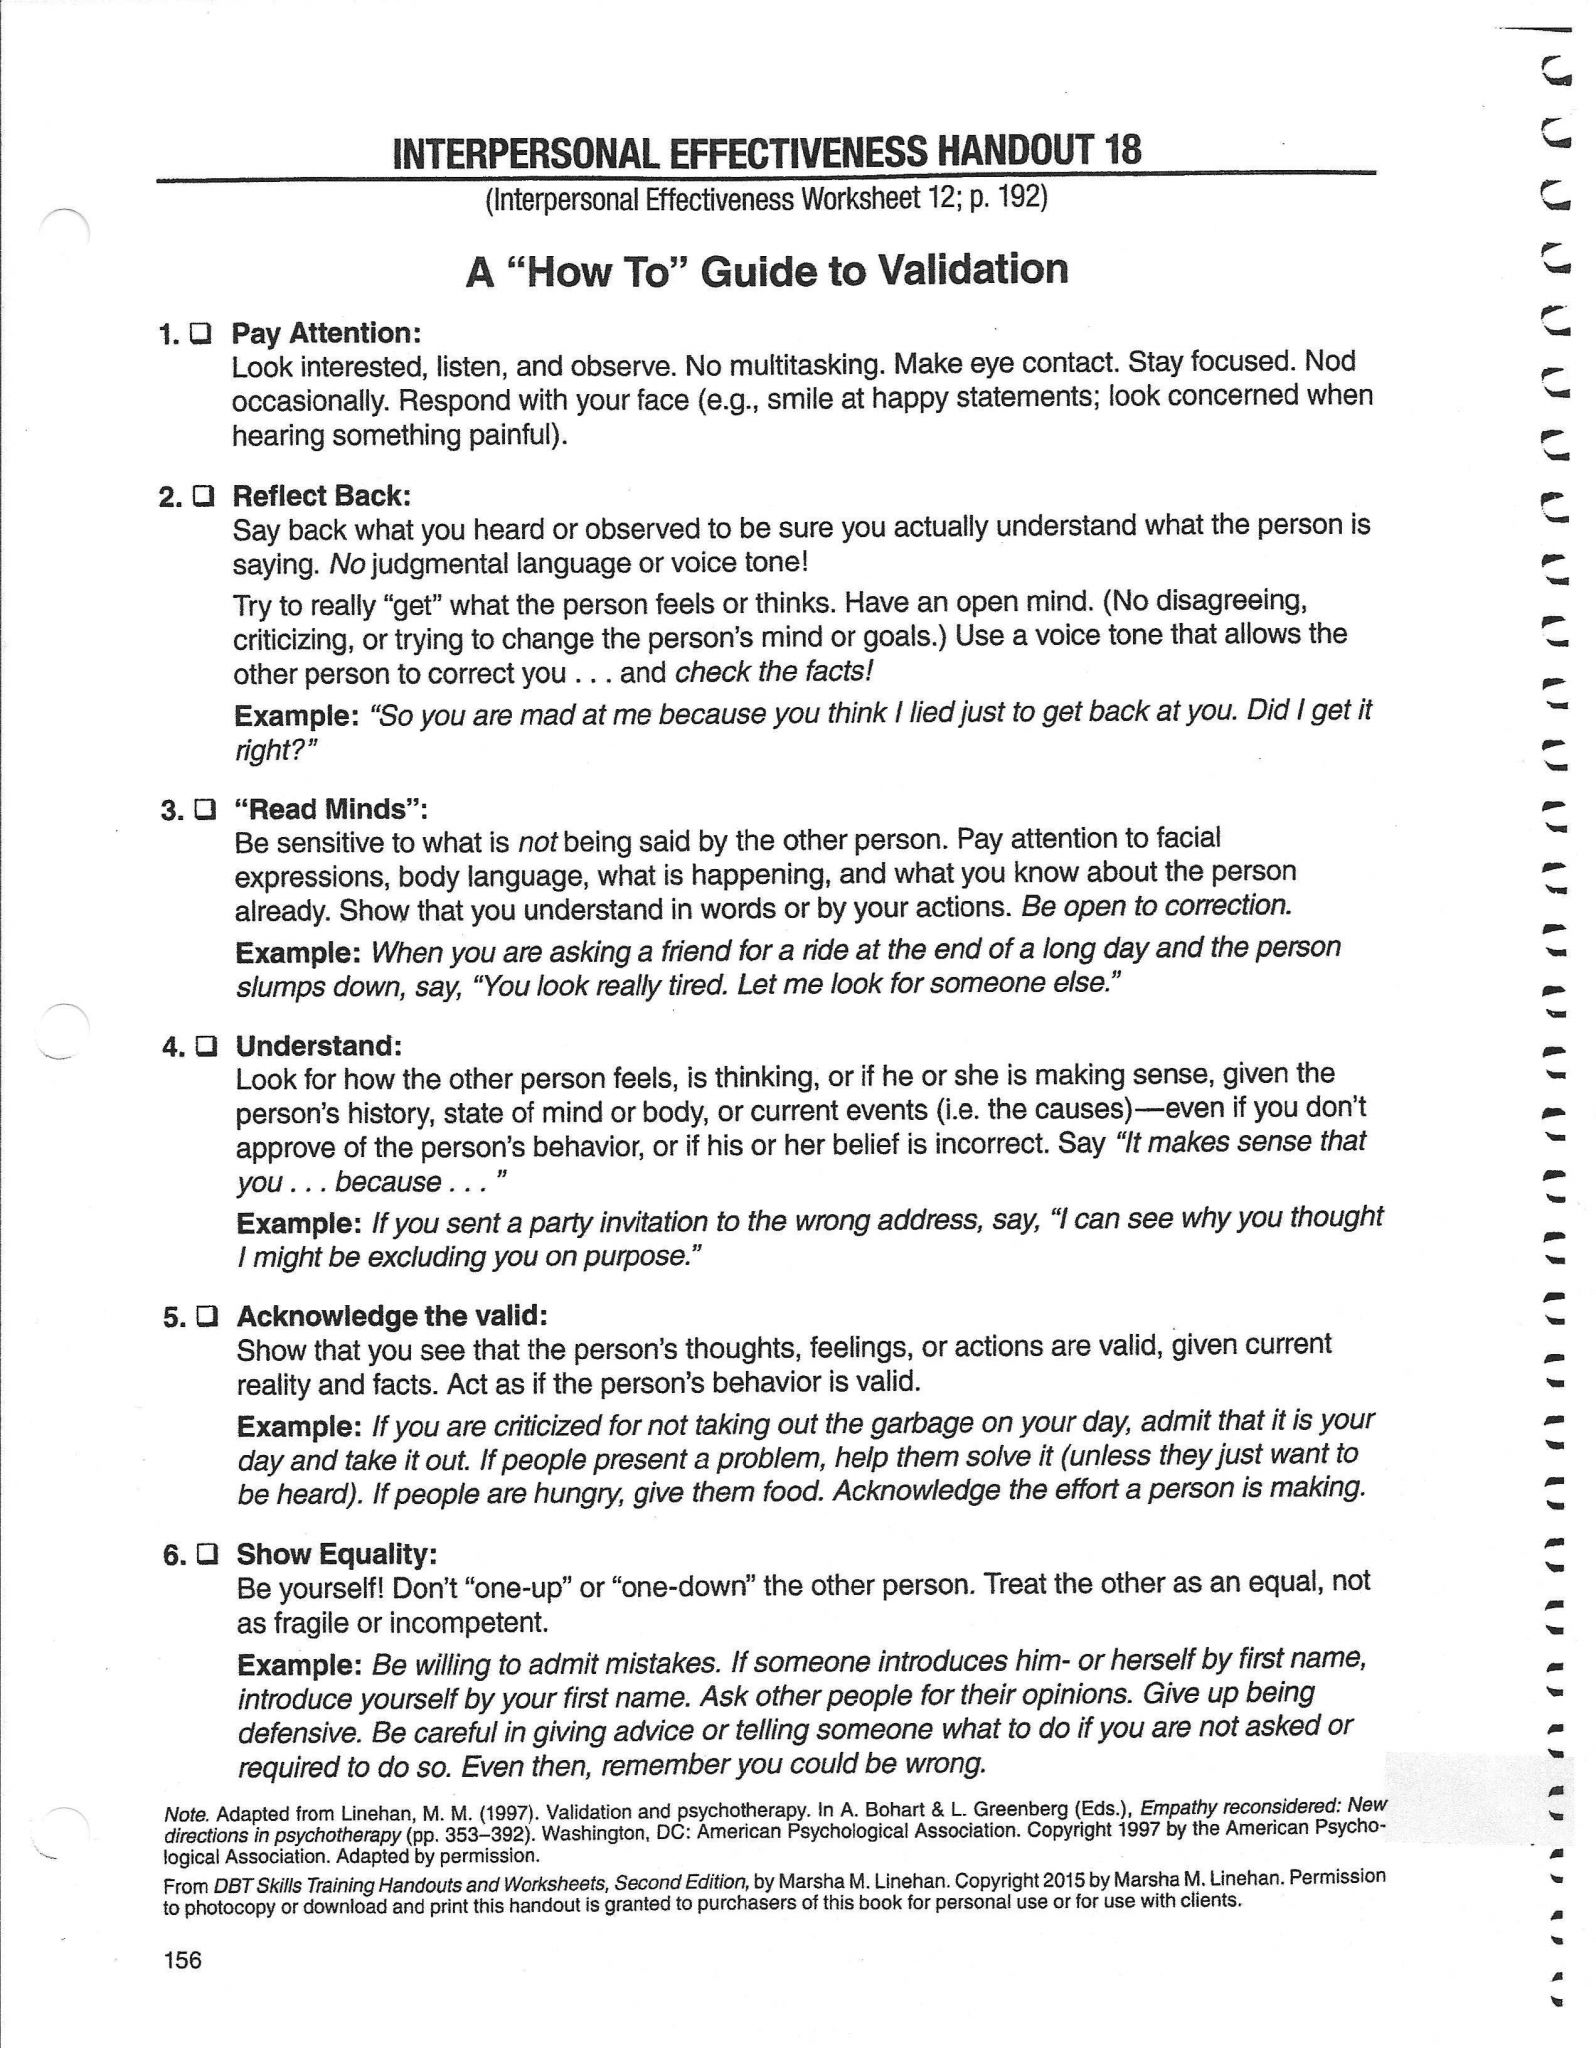 Stress Management Worksheets Pdf as Well as Dorable Adam and Eve Activity Page Kids Worksheets Lizy Pinterest